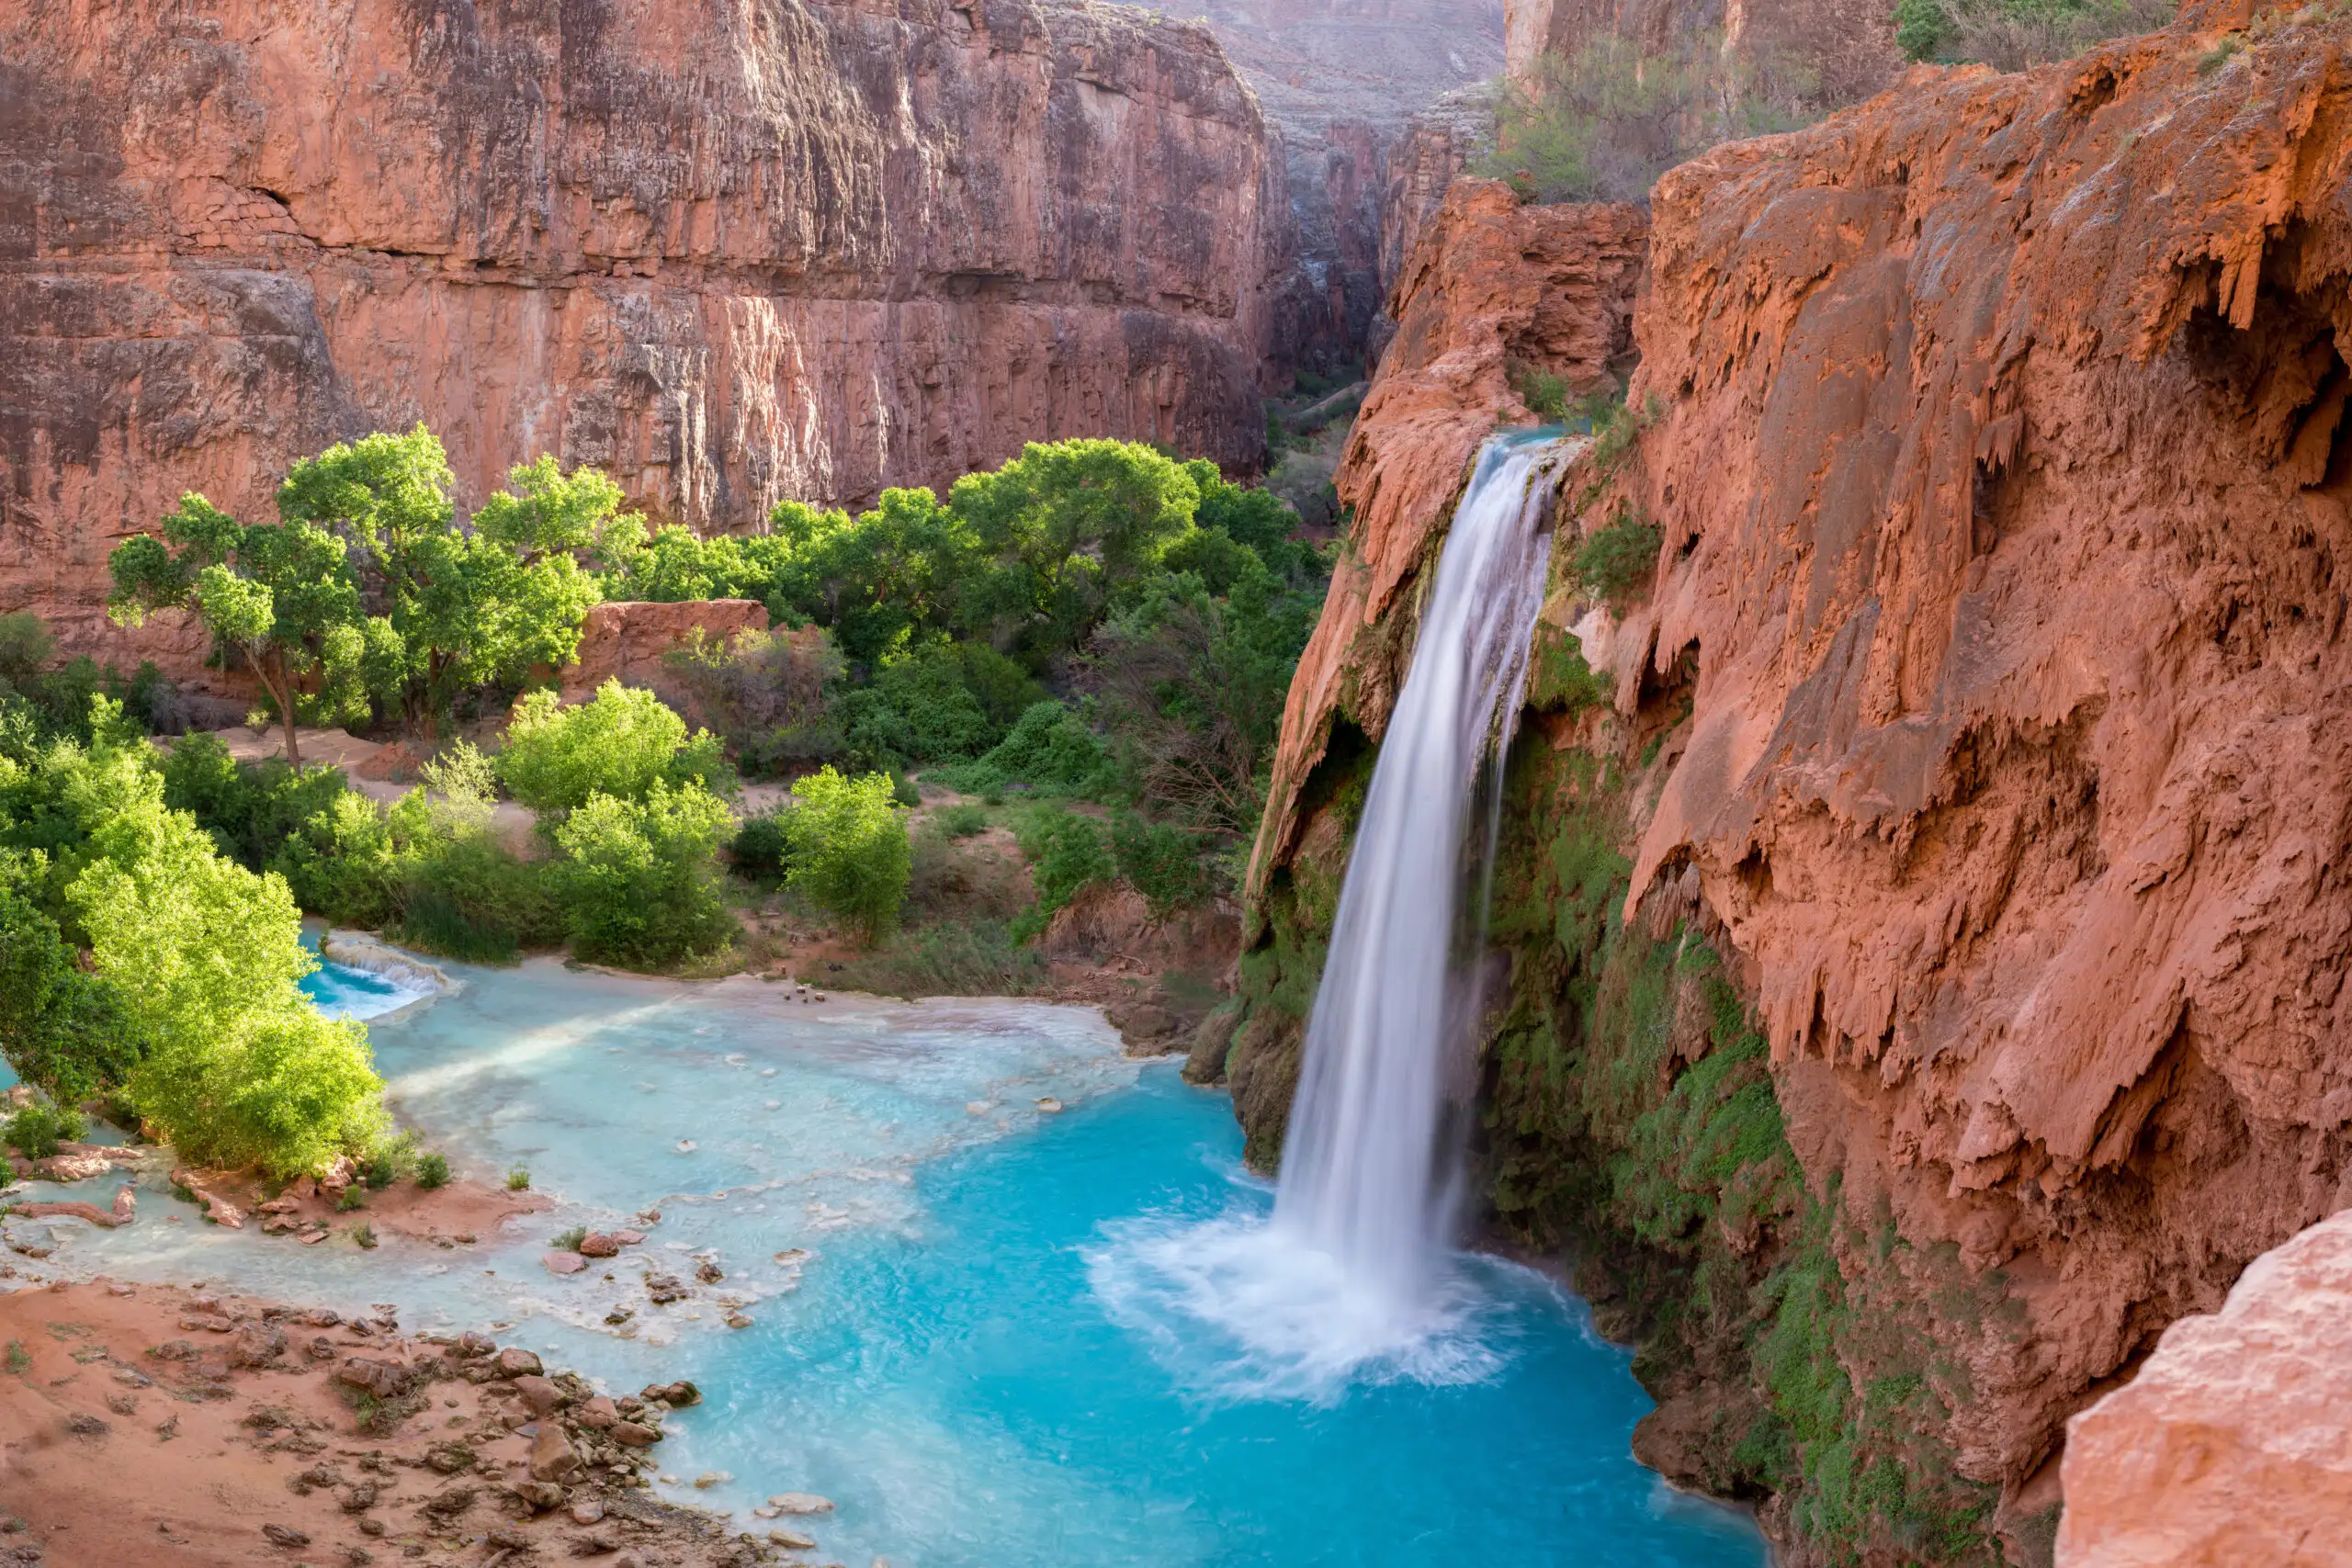 A view of Havasu Falls from the hillside above in the Grand Canyon